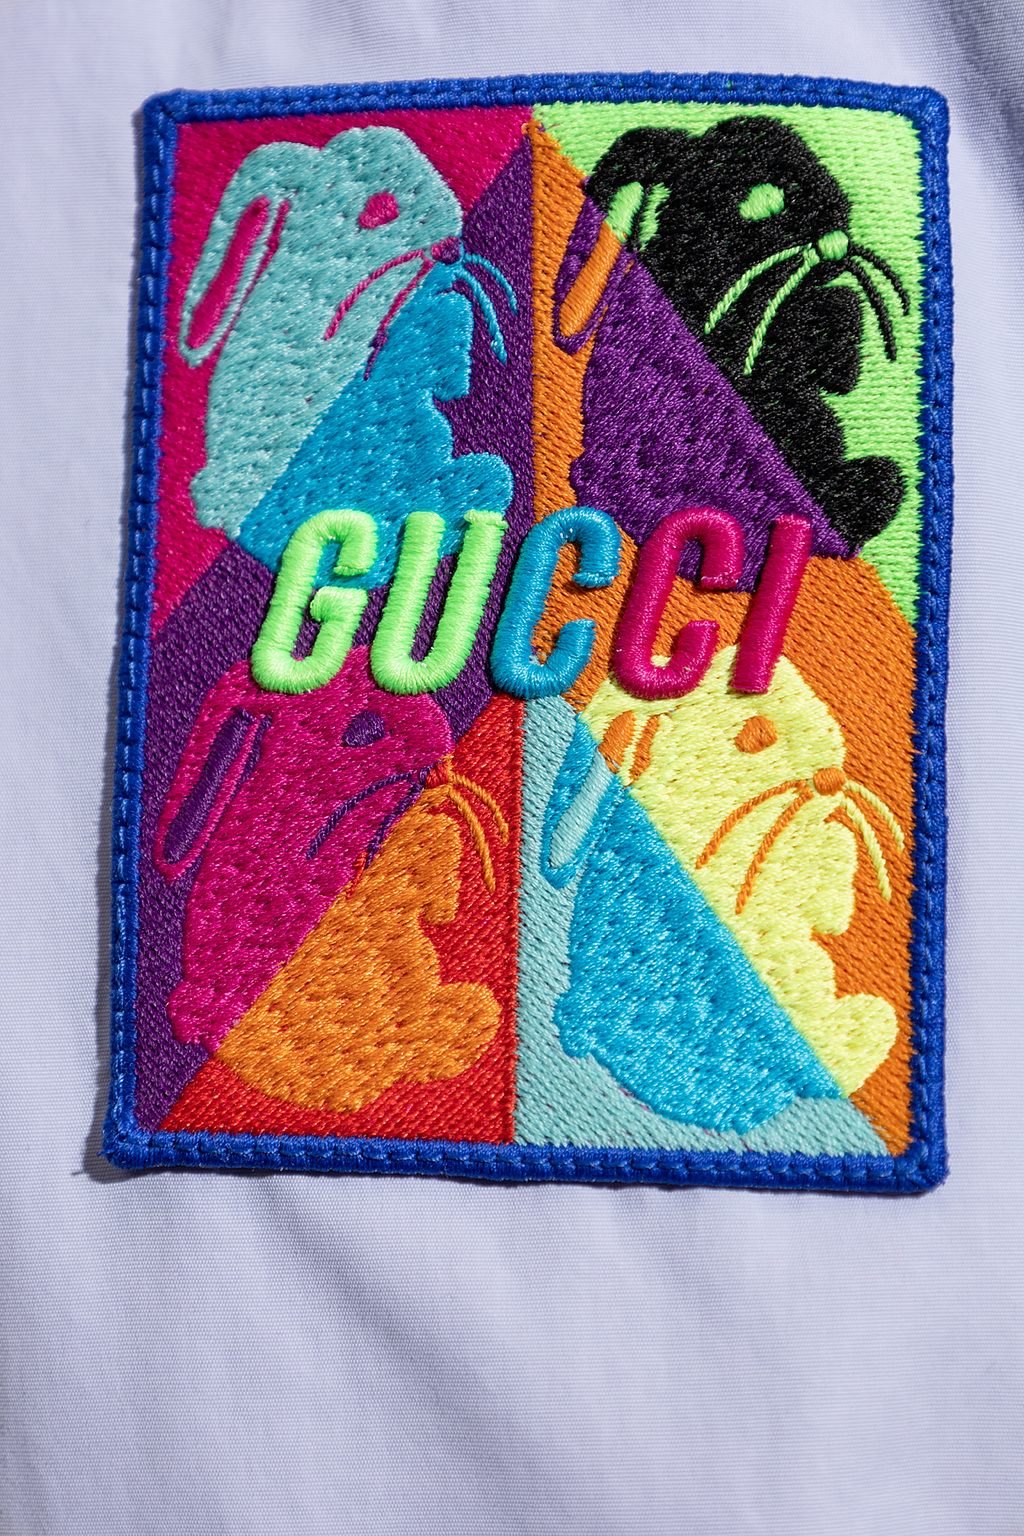 Gucci Jacket in contrasting fabrics